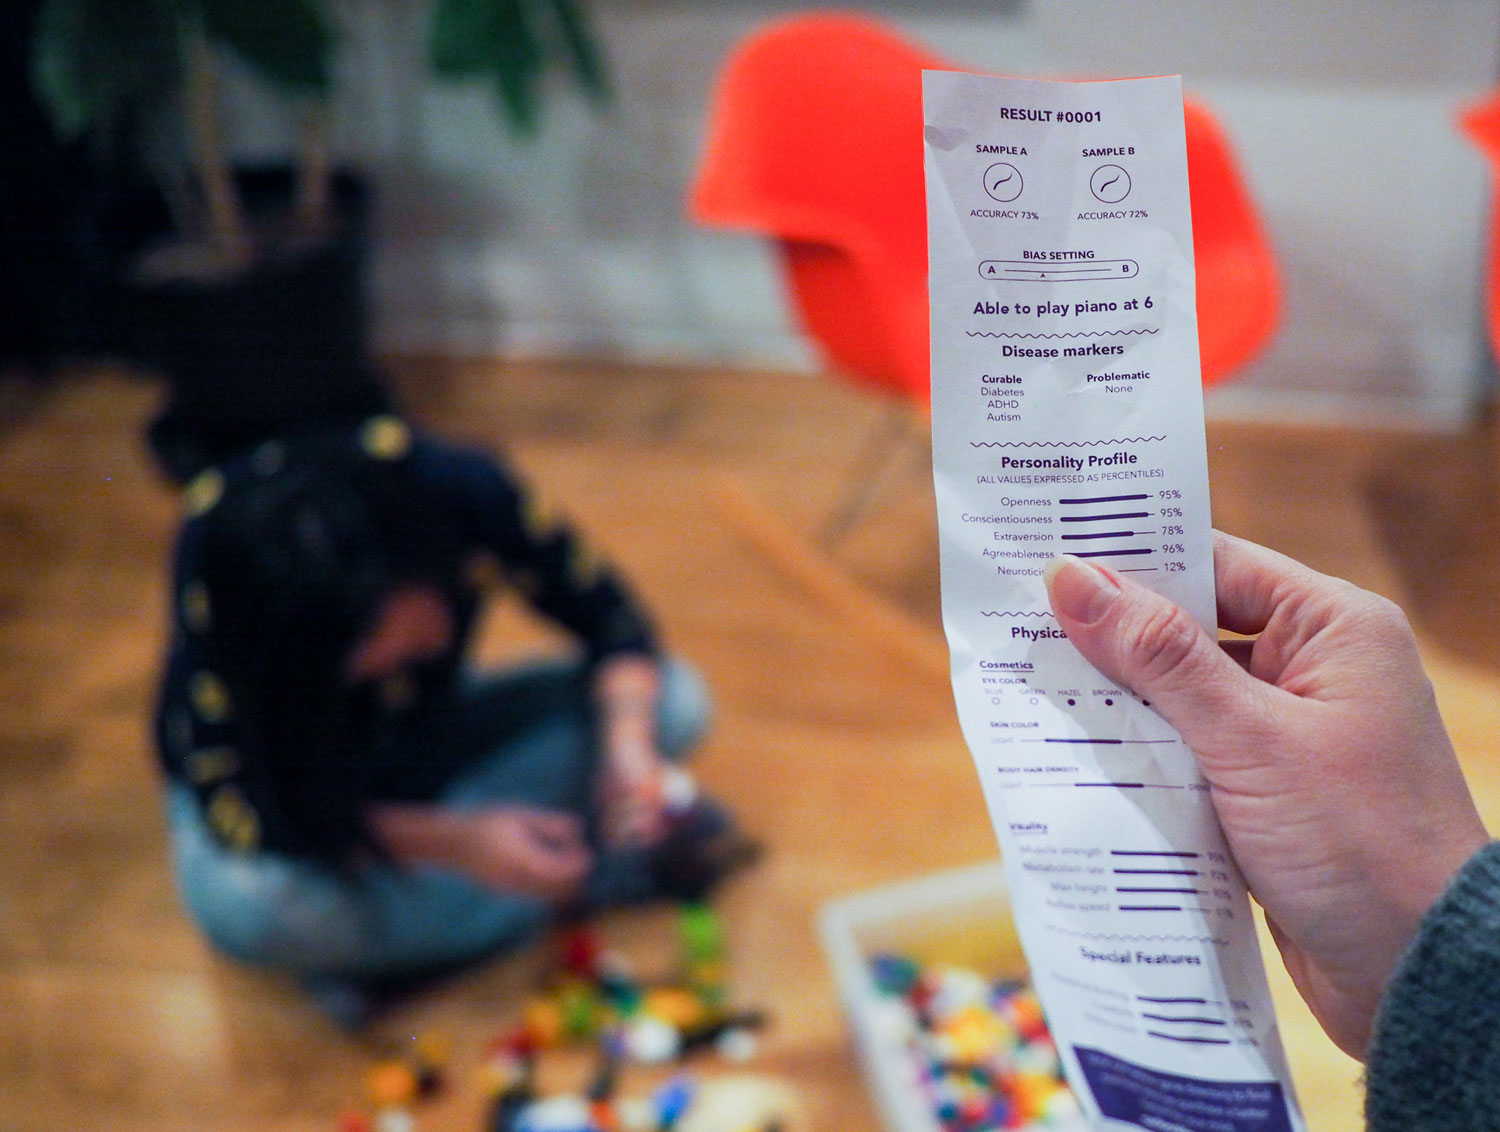 A person holds a printout from the Combinator showing that the child would be above average, while looking at a child playing legos